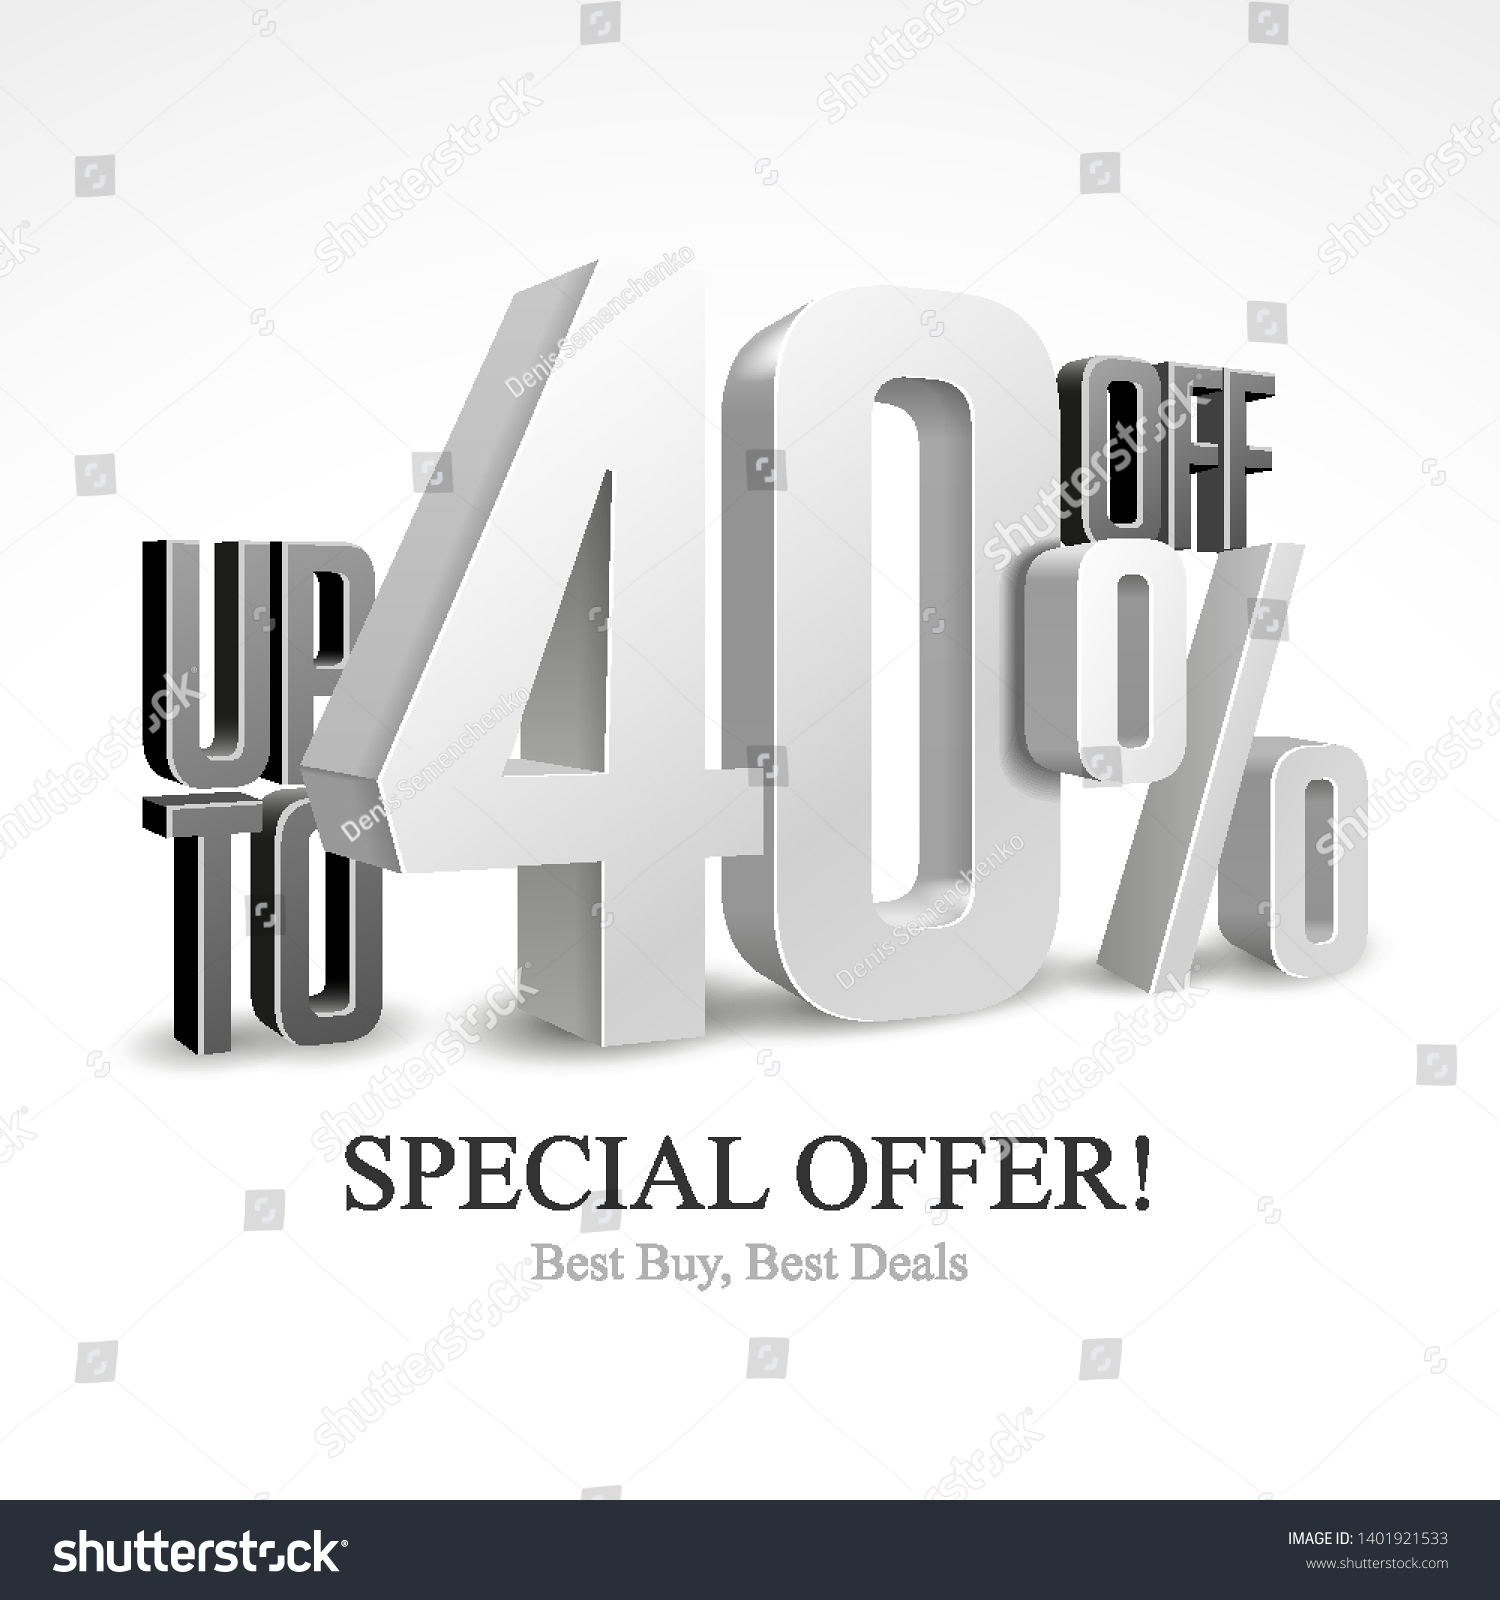 SVG of Up To 40% Off Special Offer Silver 3D Digits Banner, Template Forty Percent. Sale, Discount. Grayscale, Metal, Gray, Glossy Numbers. Illustration Isolated On White Background. Ready For Your Design. svg